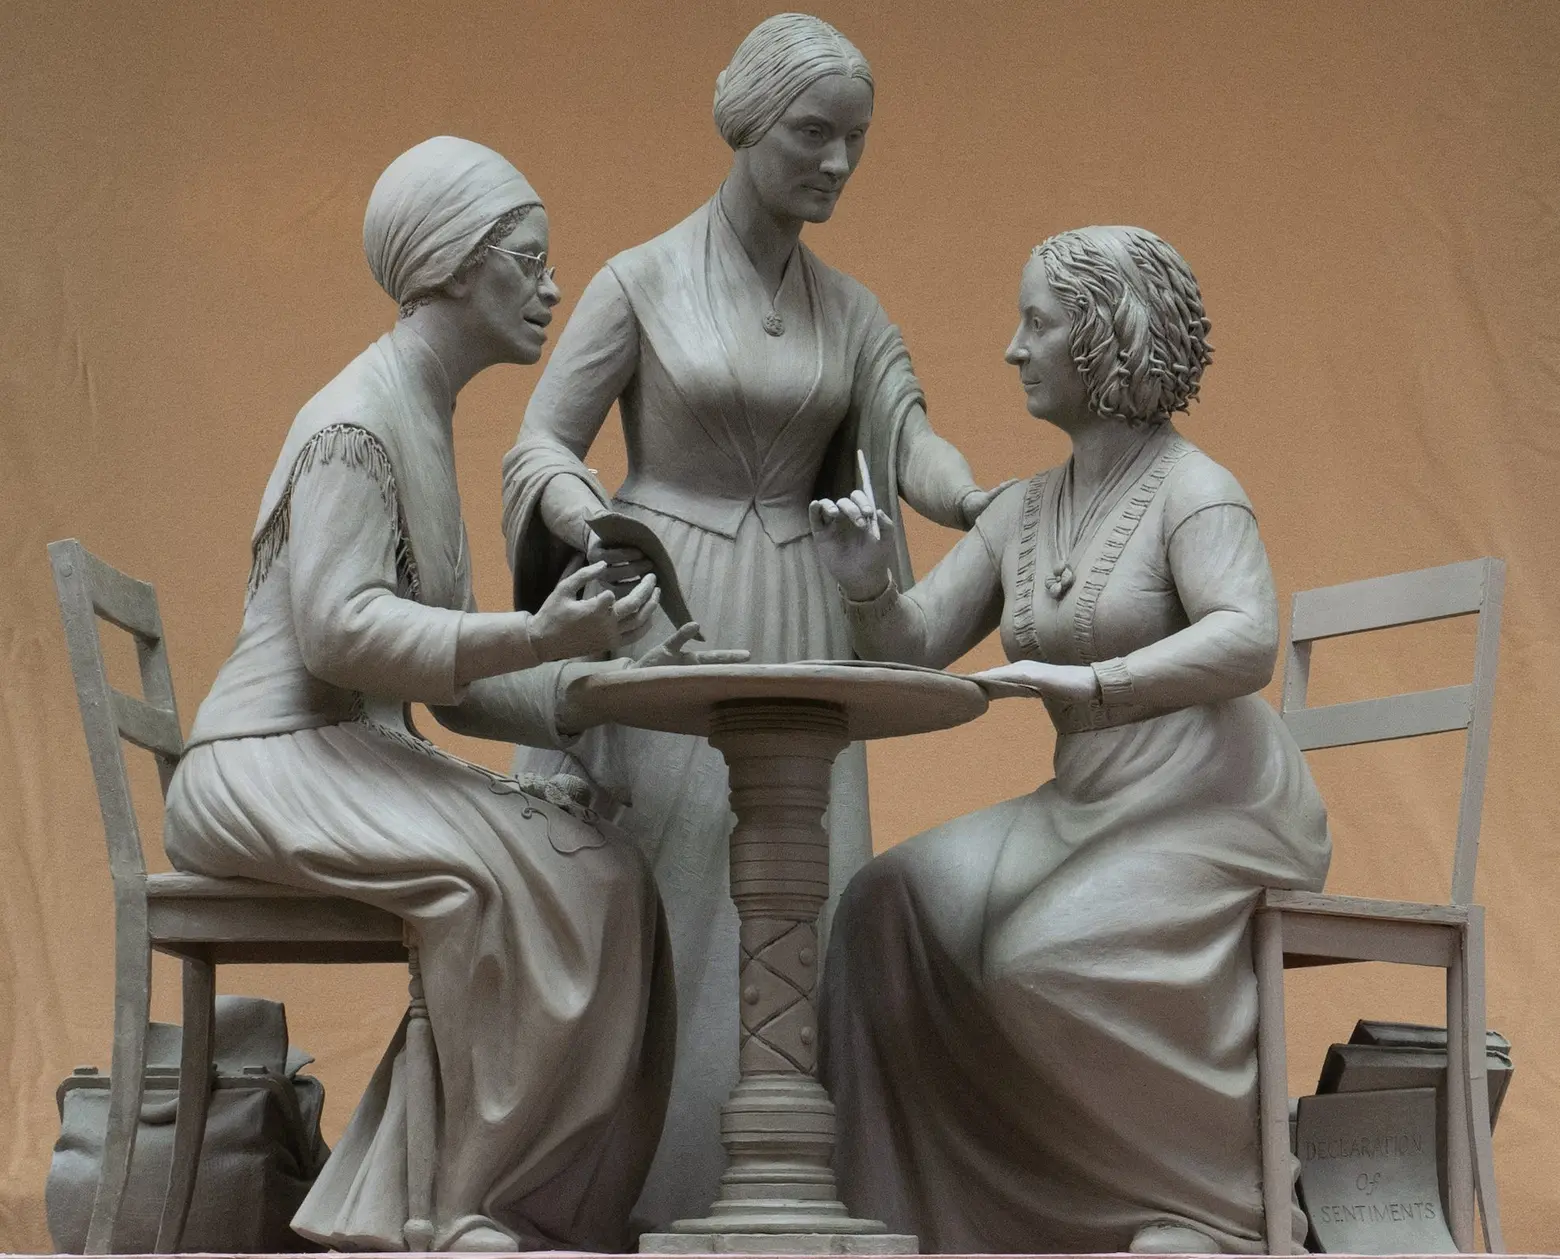 City approves design for Central Park’s first statue of women